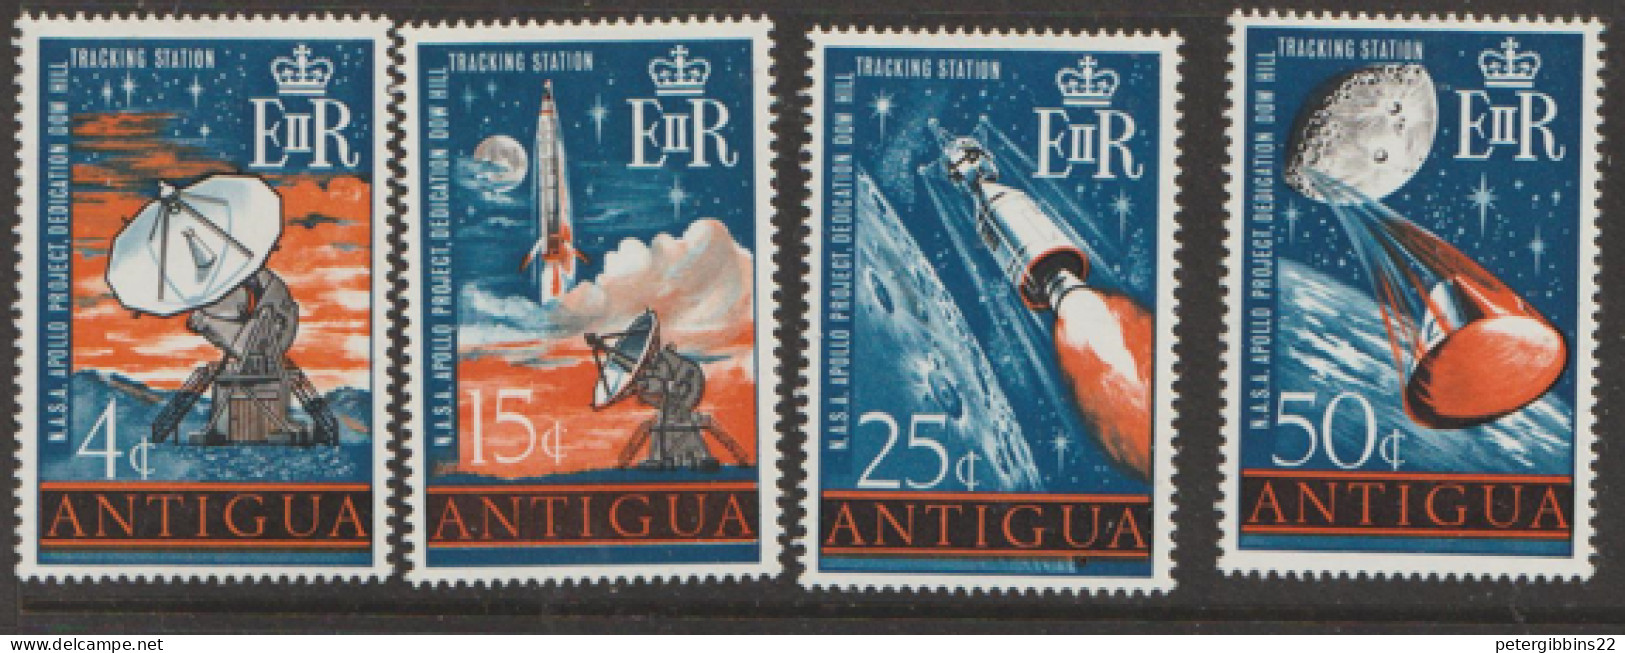 Antigua  1968  SG 212-5  Tracking Station  Lightly Mounted Mint - 1960-1981 Ministerial Government